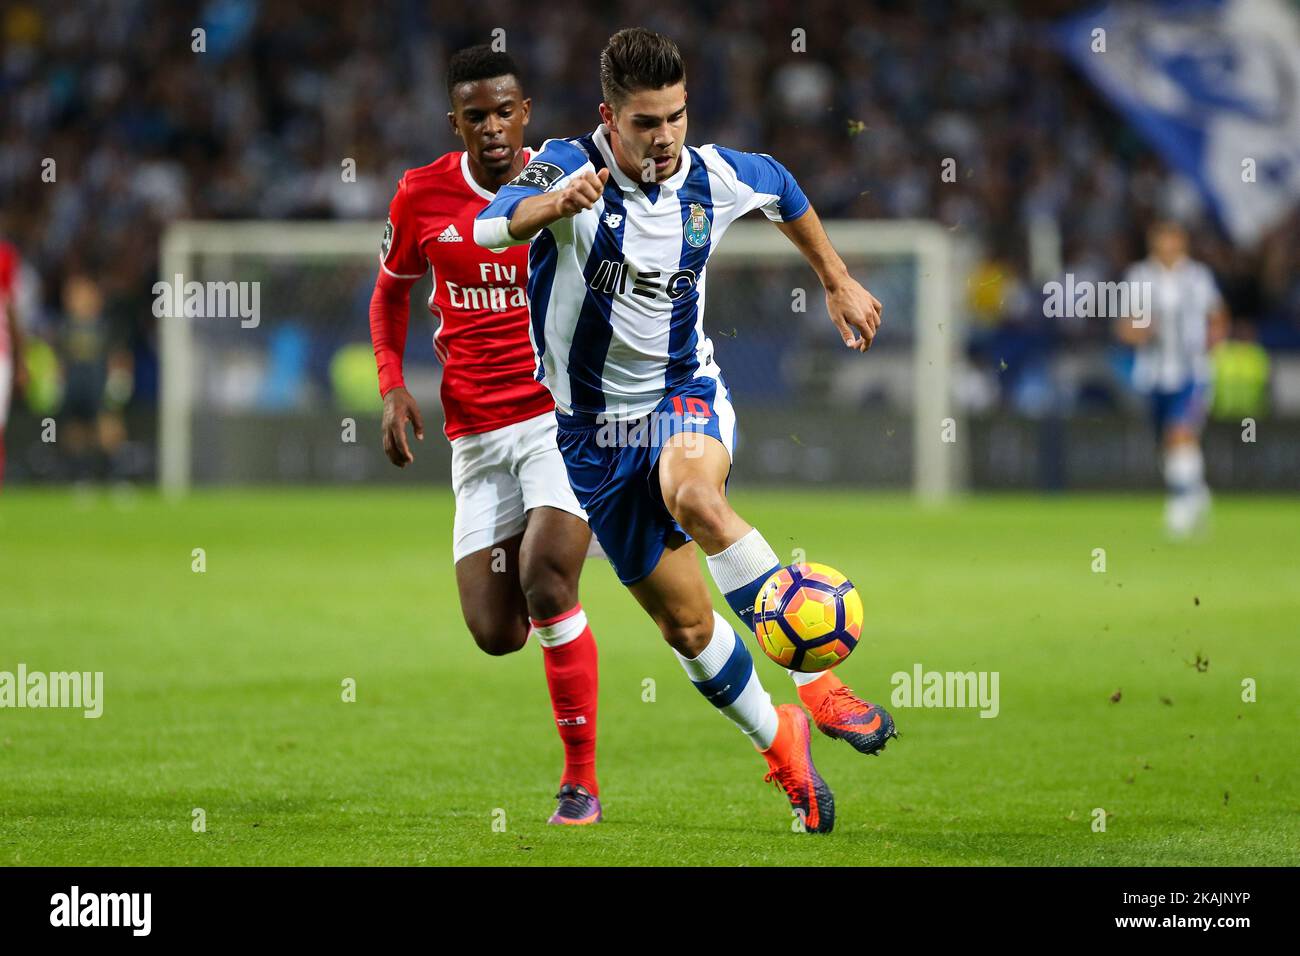 Porto's Portuguese forward Andre Silva (R) in action with Benfica's Portuguese defender Nelson Semedo (L) during the Premier League 2016/17 match between FC Porto and SL Benfica, at Dragao Stadium in Porto on November 6, 2016. (Photo by Paulo Oliveira / DPI / NurPhoto) *** Please Use Credit from Credit Field *** Stock Photo